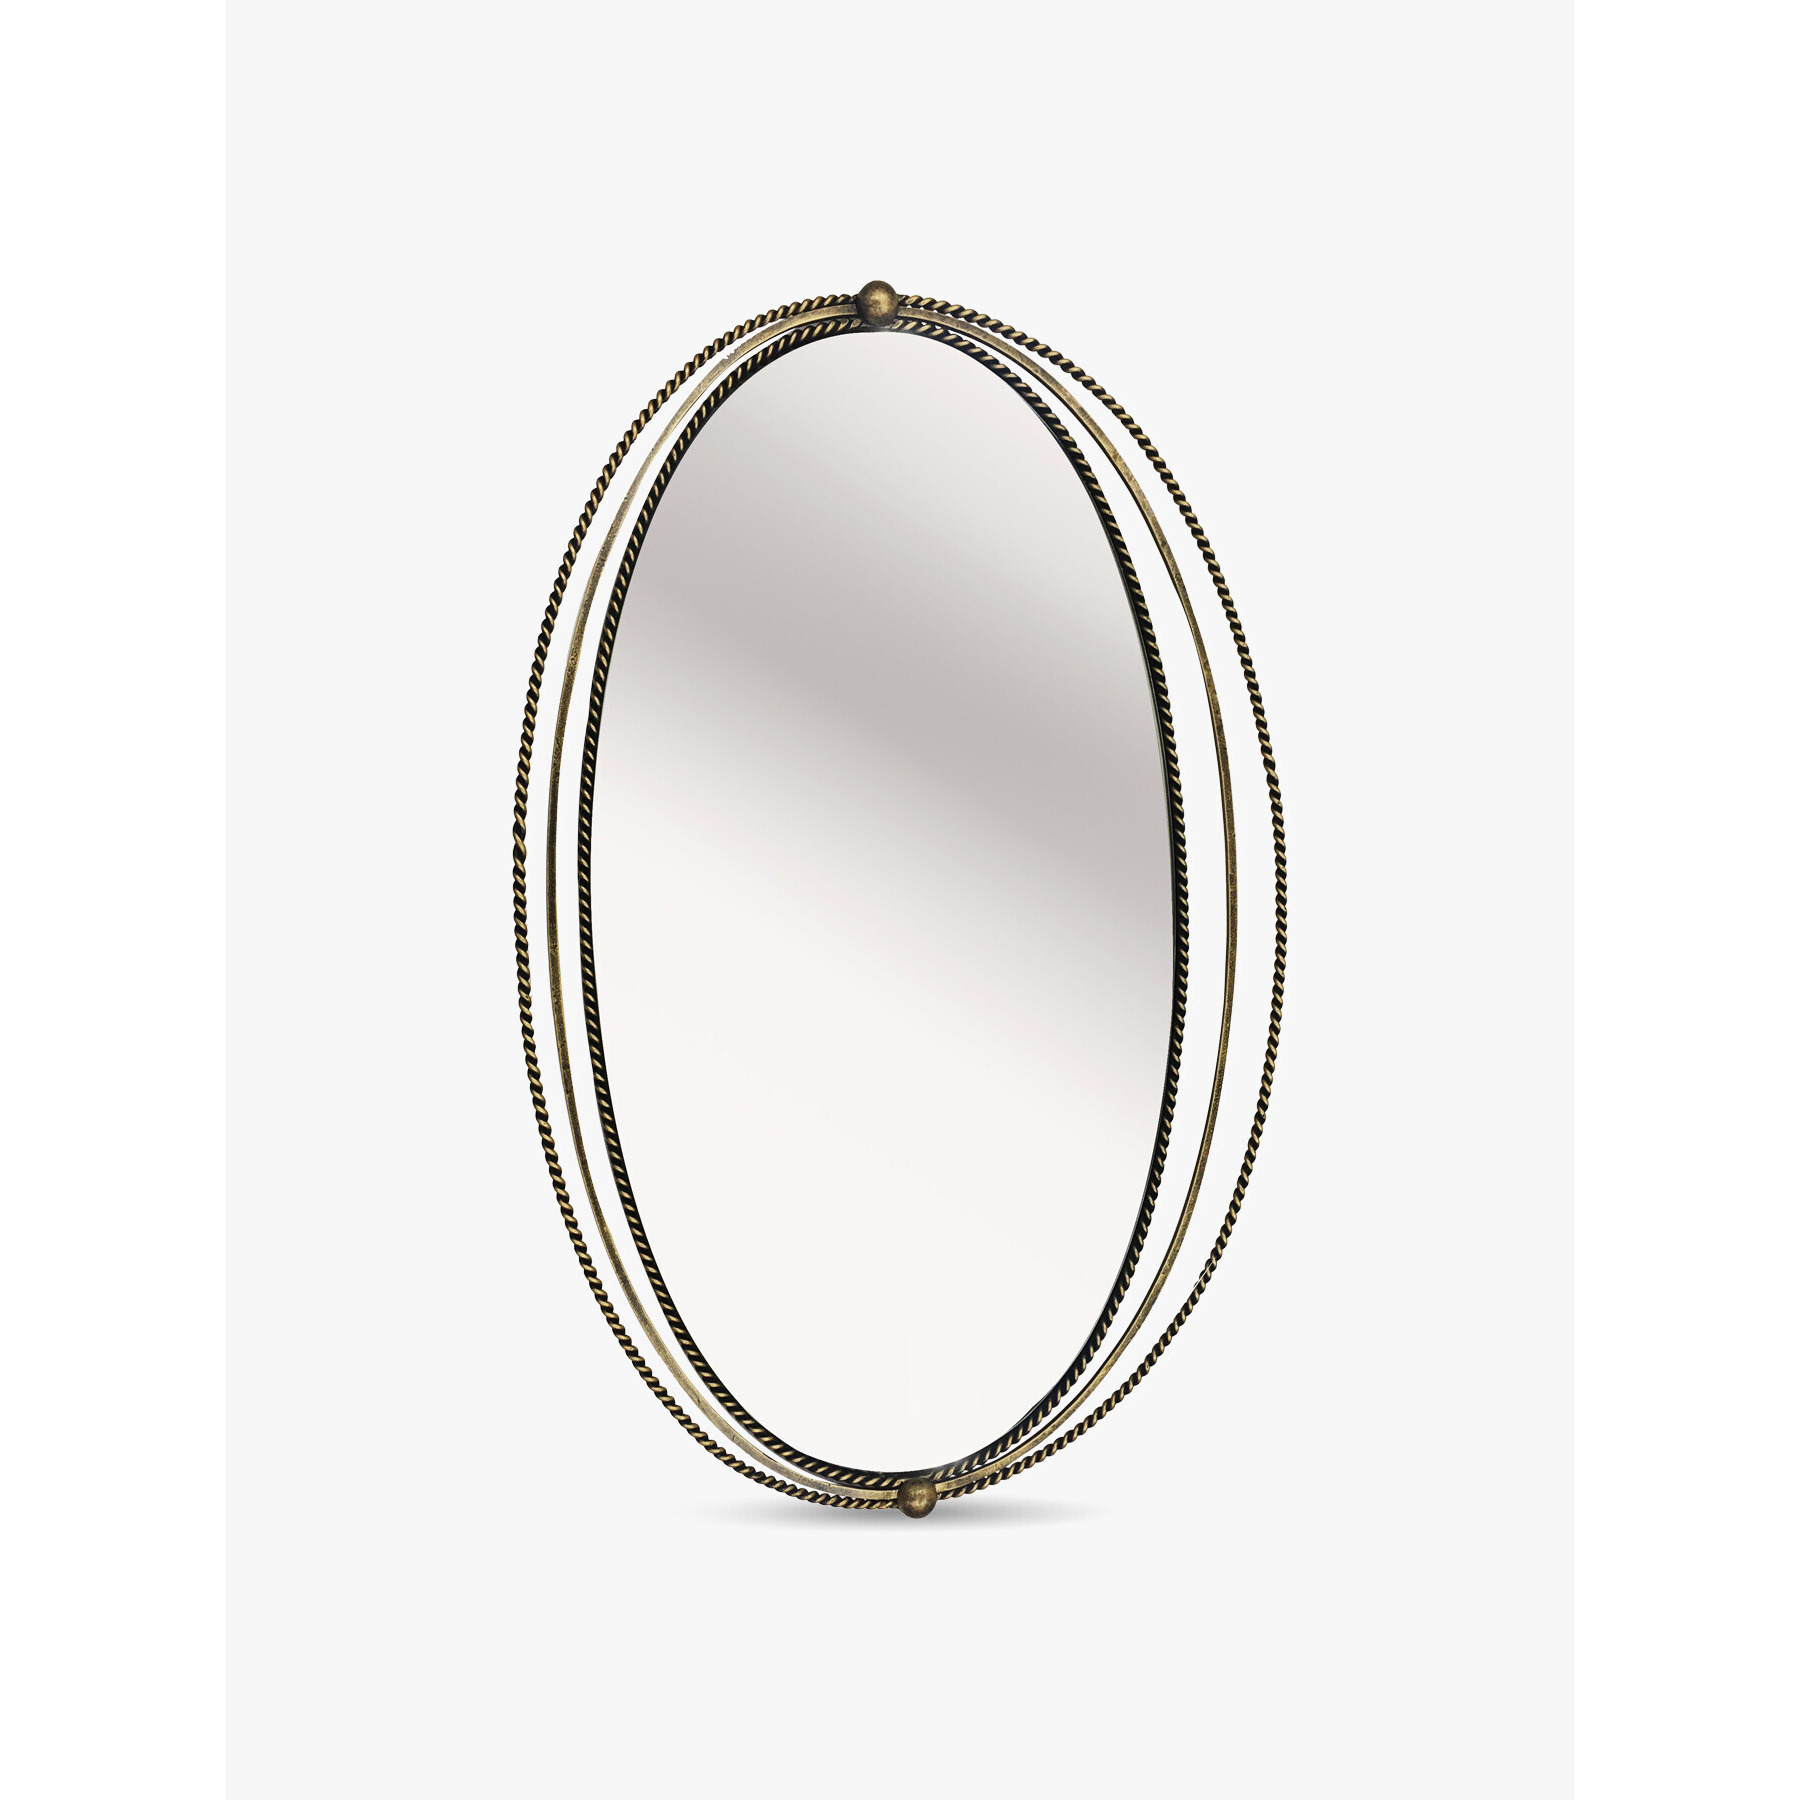 Libra Interiors Carrick Oval Gold Iron Mirror With Fine Rope Detail - Size 7x49x77 Gold/Silver - image 1